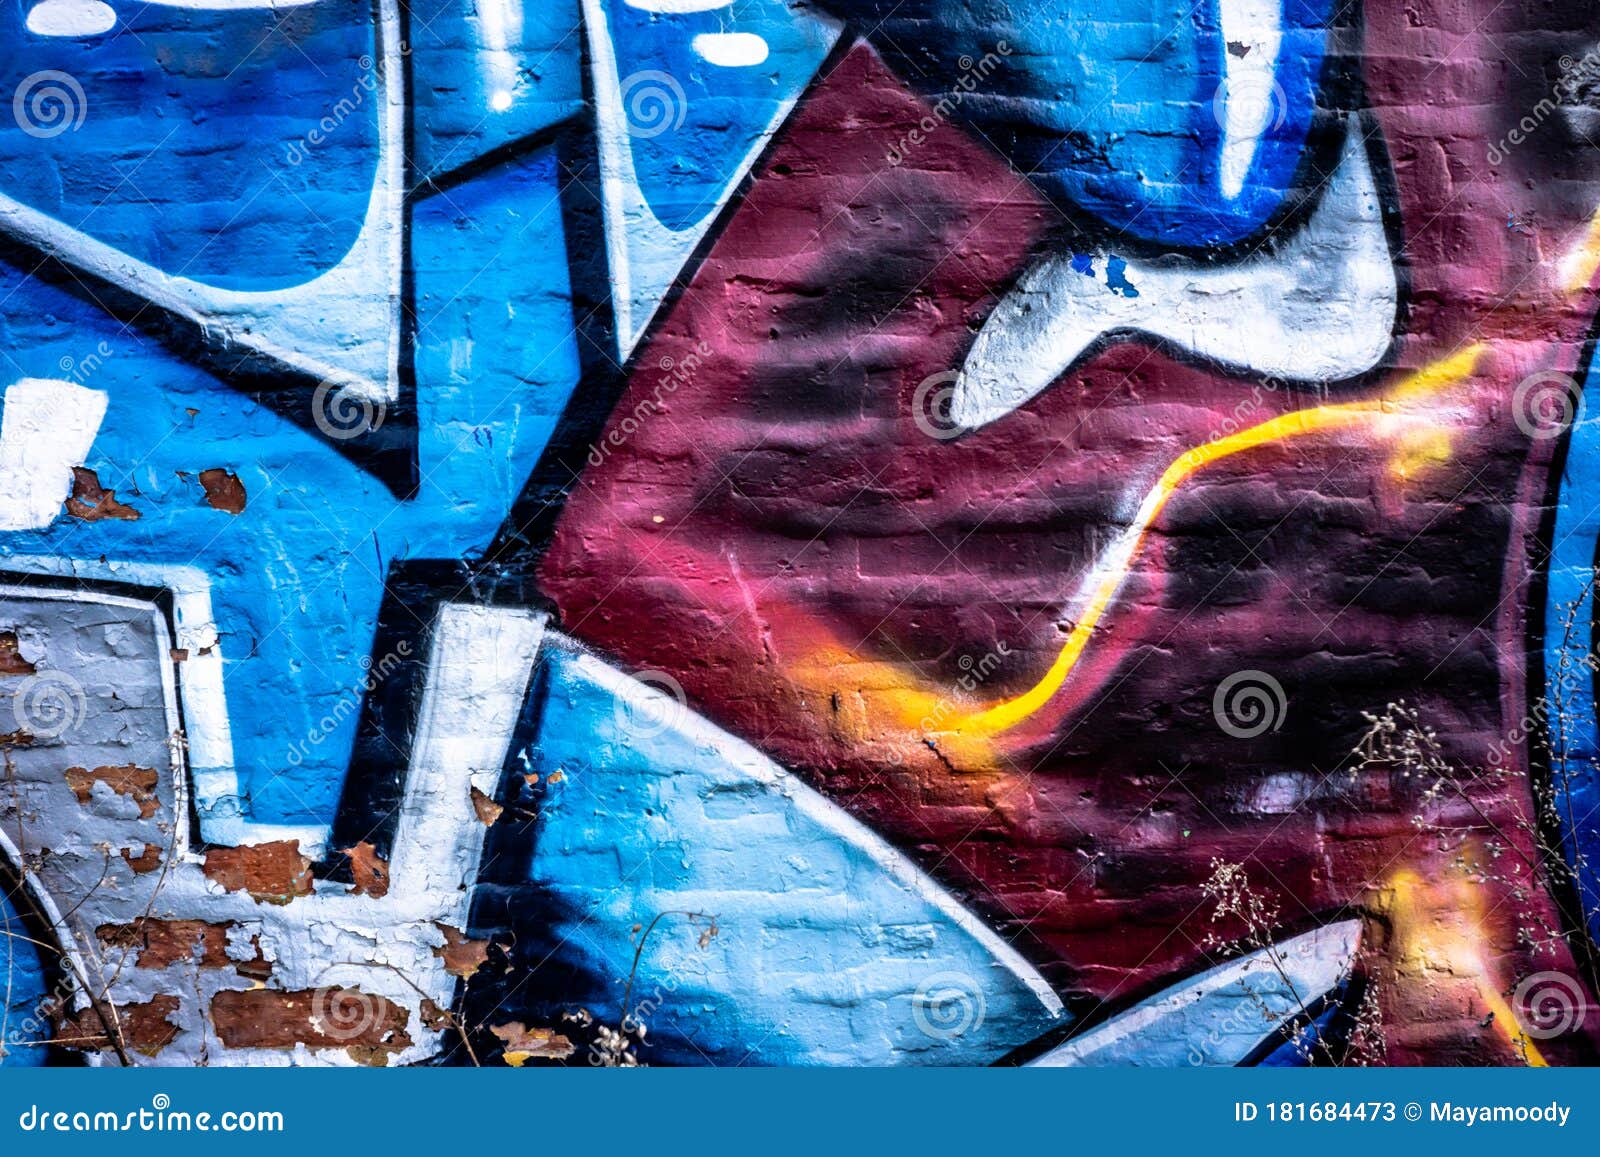 Urban Abstract Graffiti Art Background on Brick Wall with Colors of Blue  White Red Rust and Gray Editorial Stock Photo - Image of decoration,  artistic: 181684473